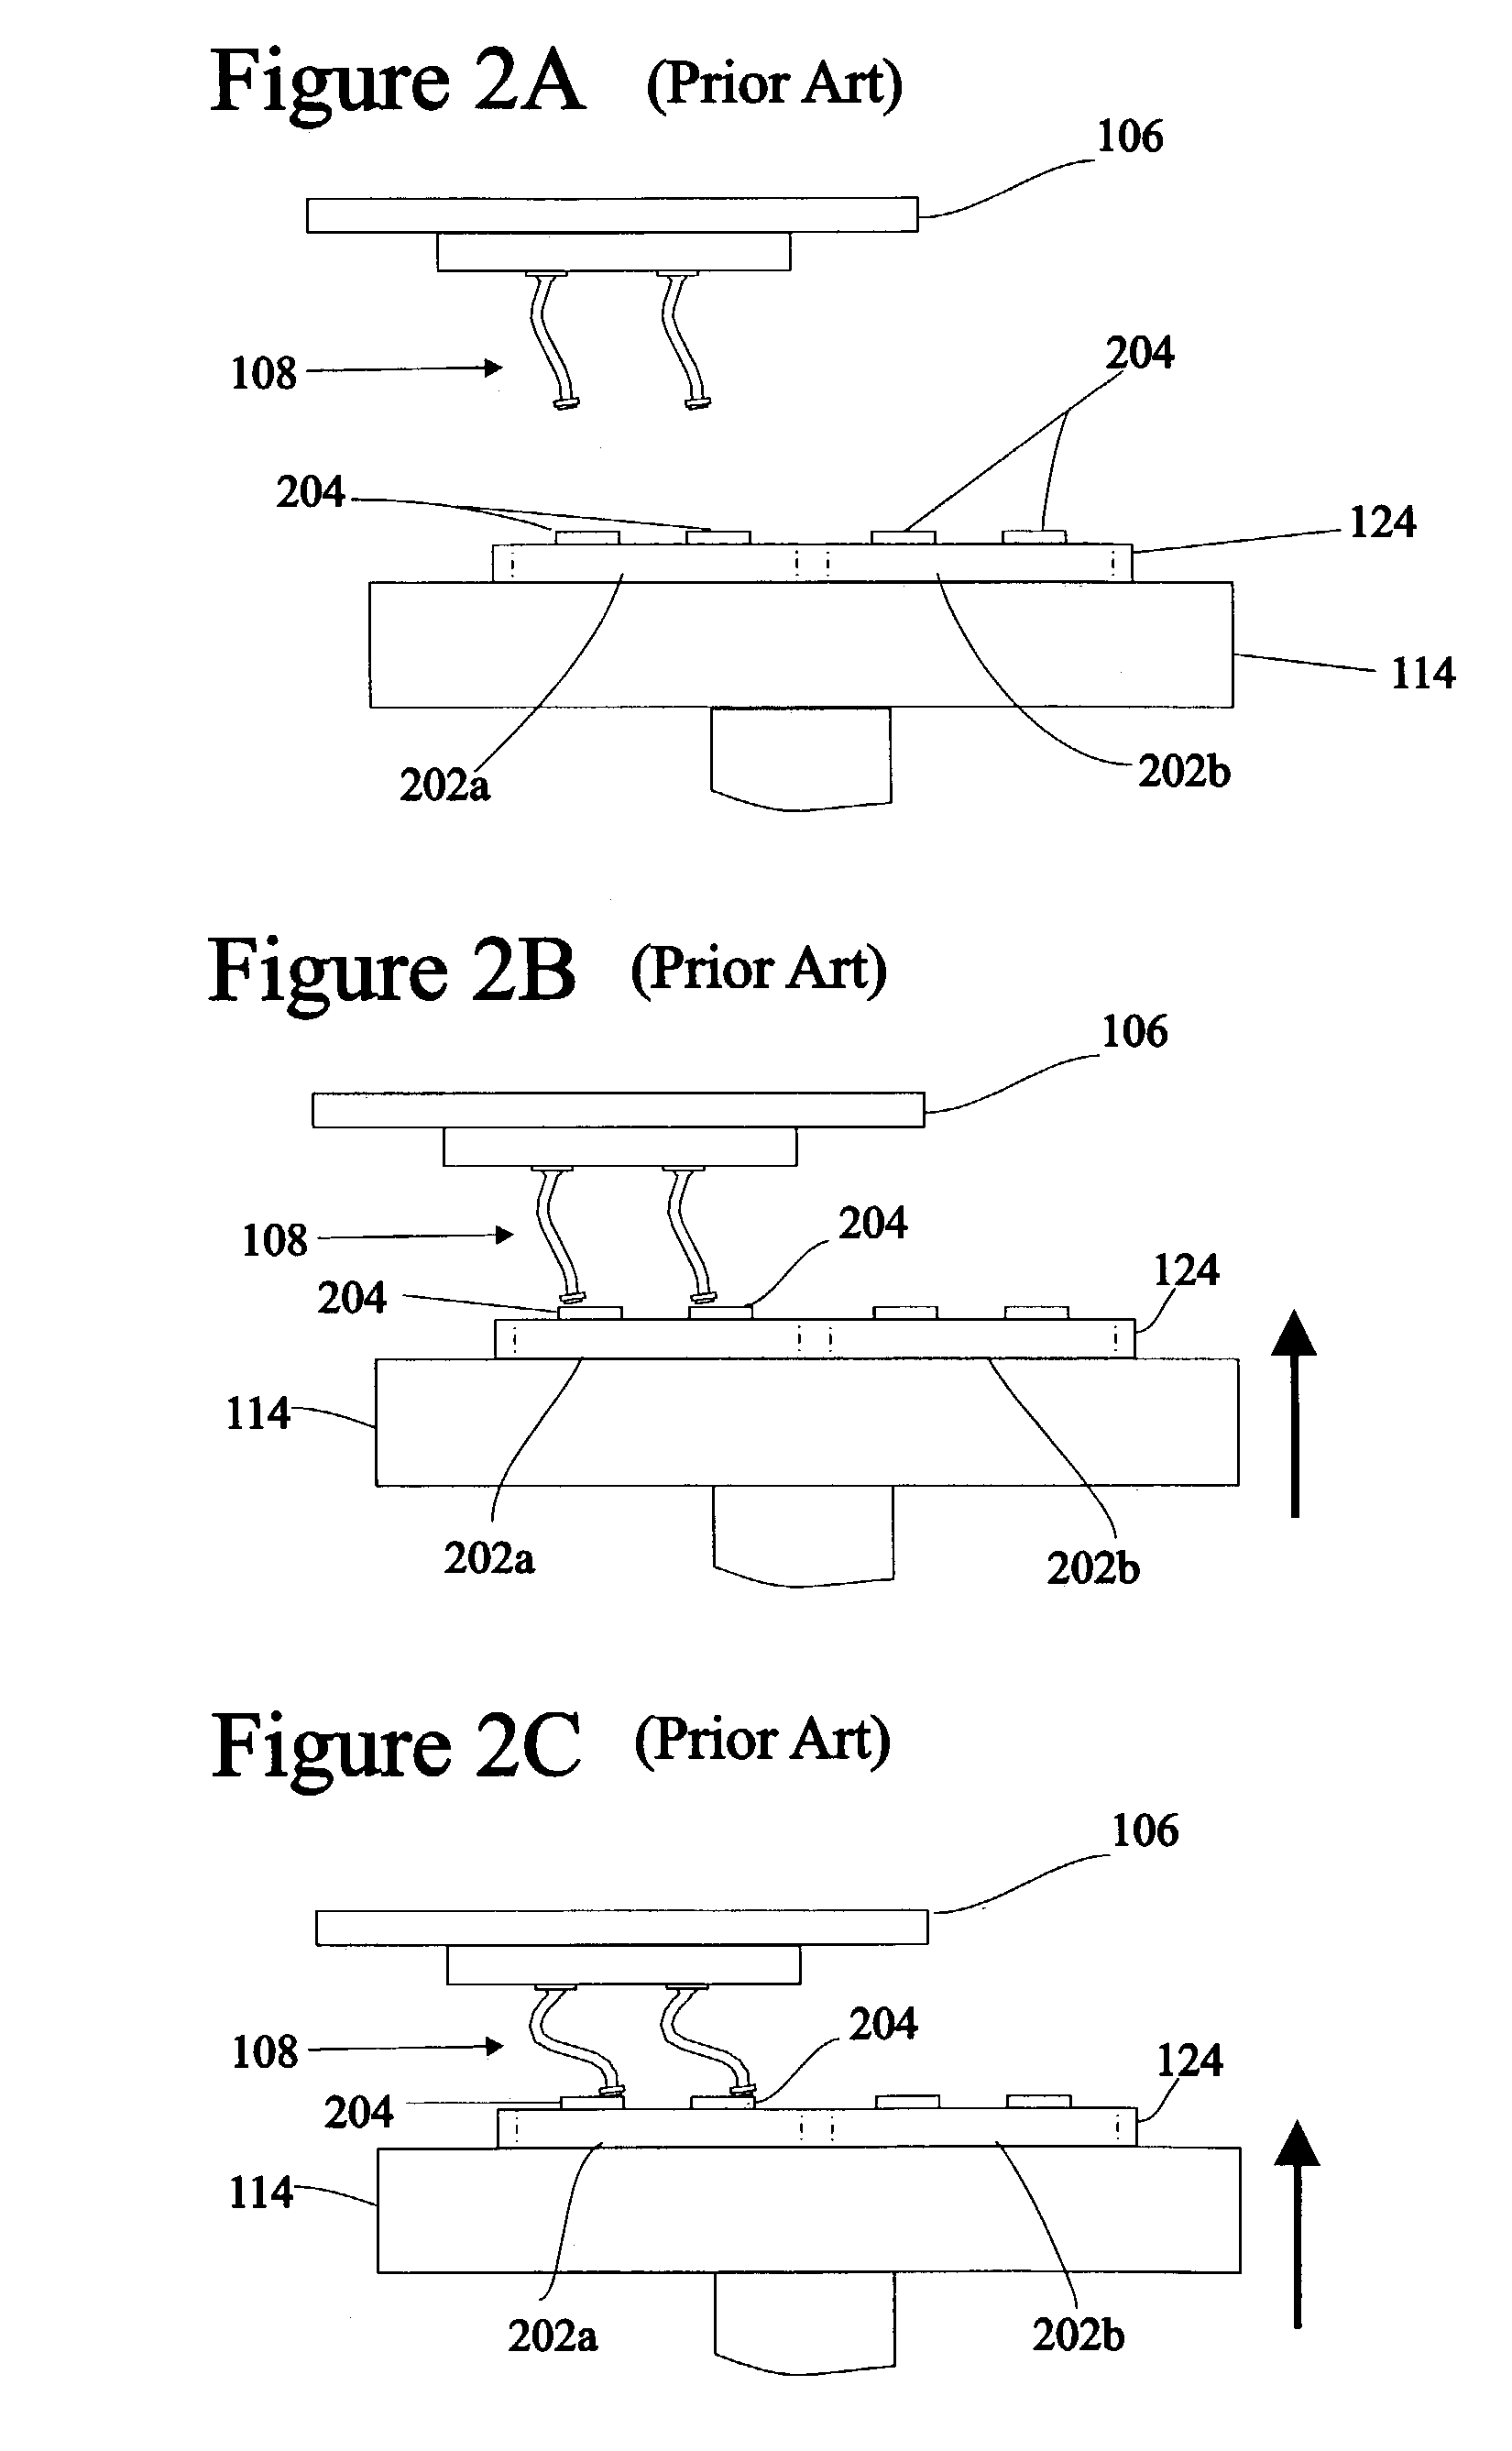 Composite motion probing